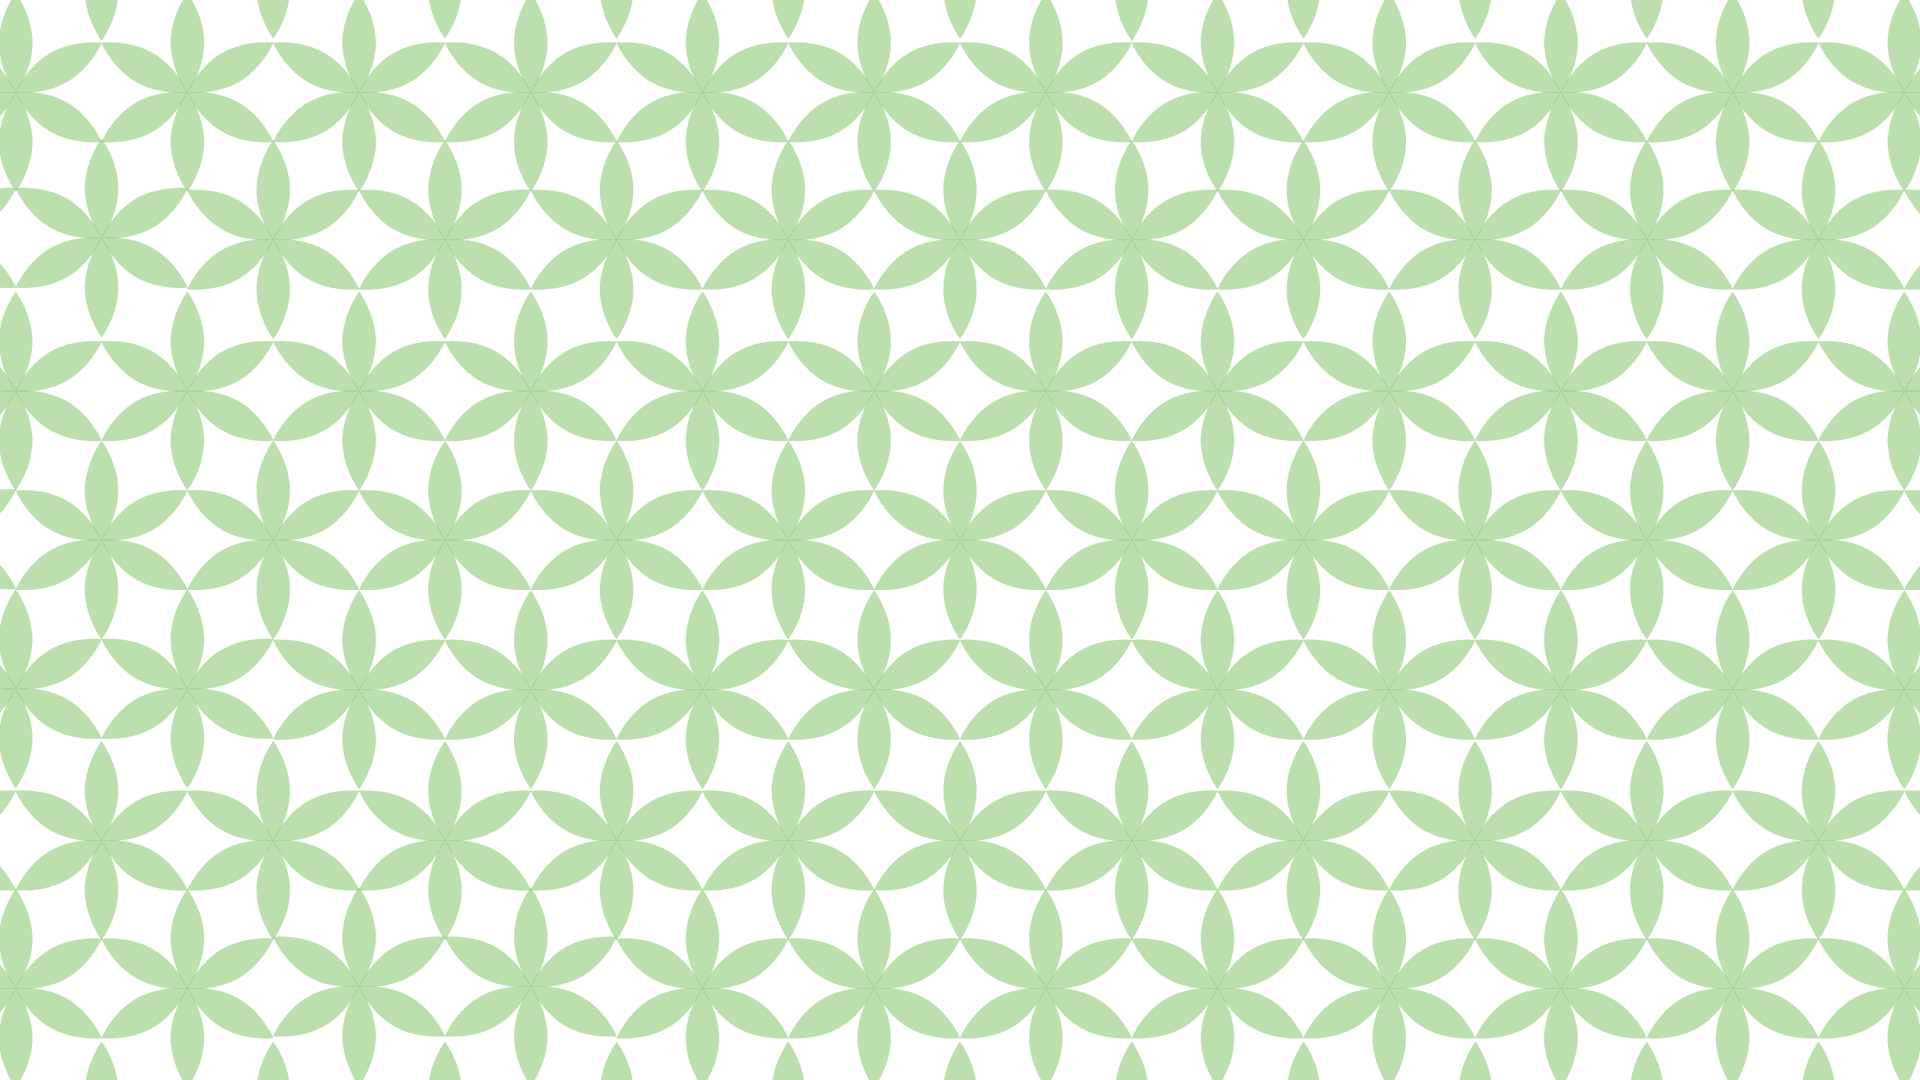 "emerald Blooms: An Aesthetic Image Of Green Floral Pattern"